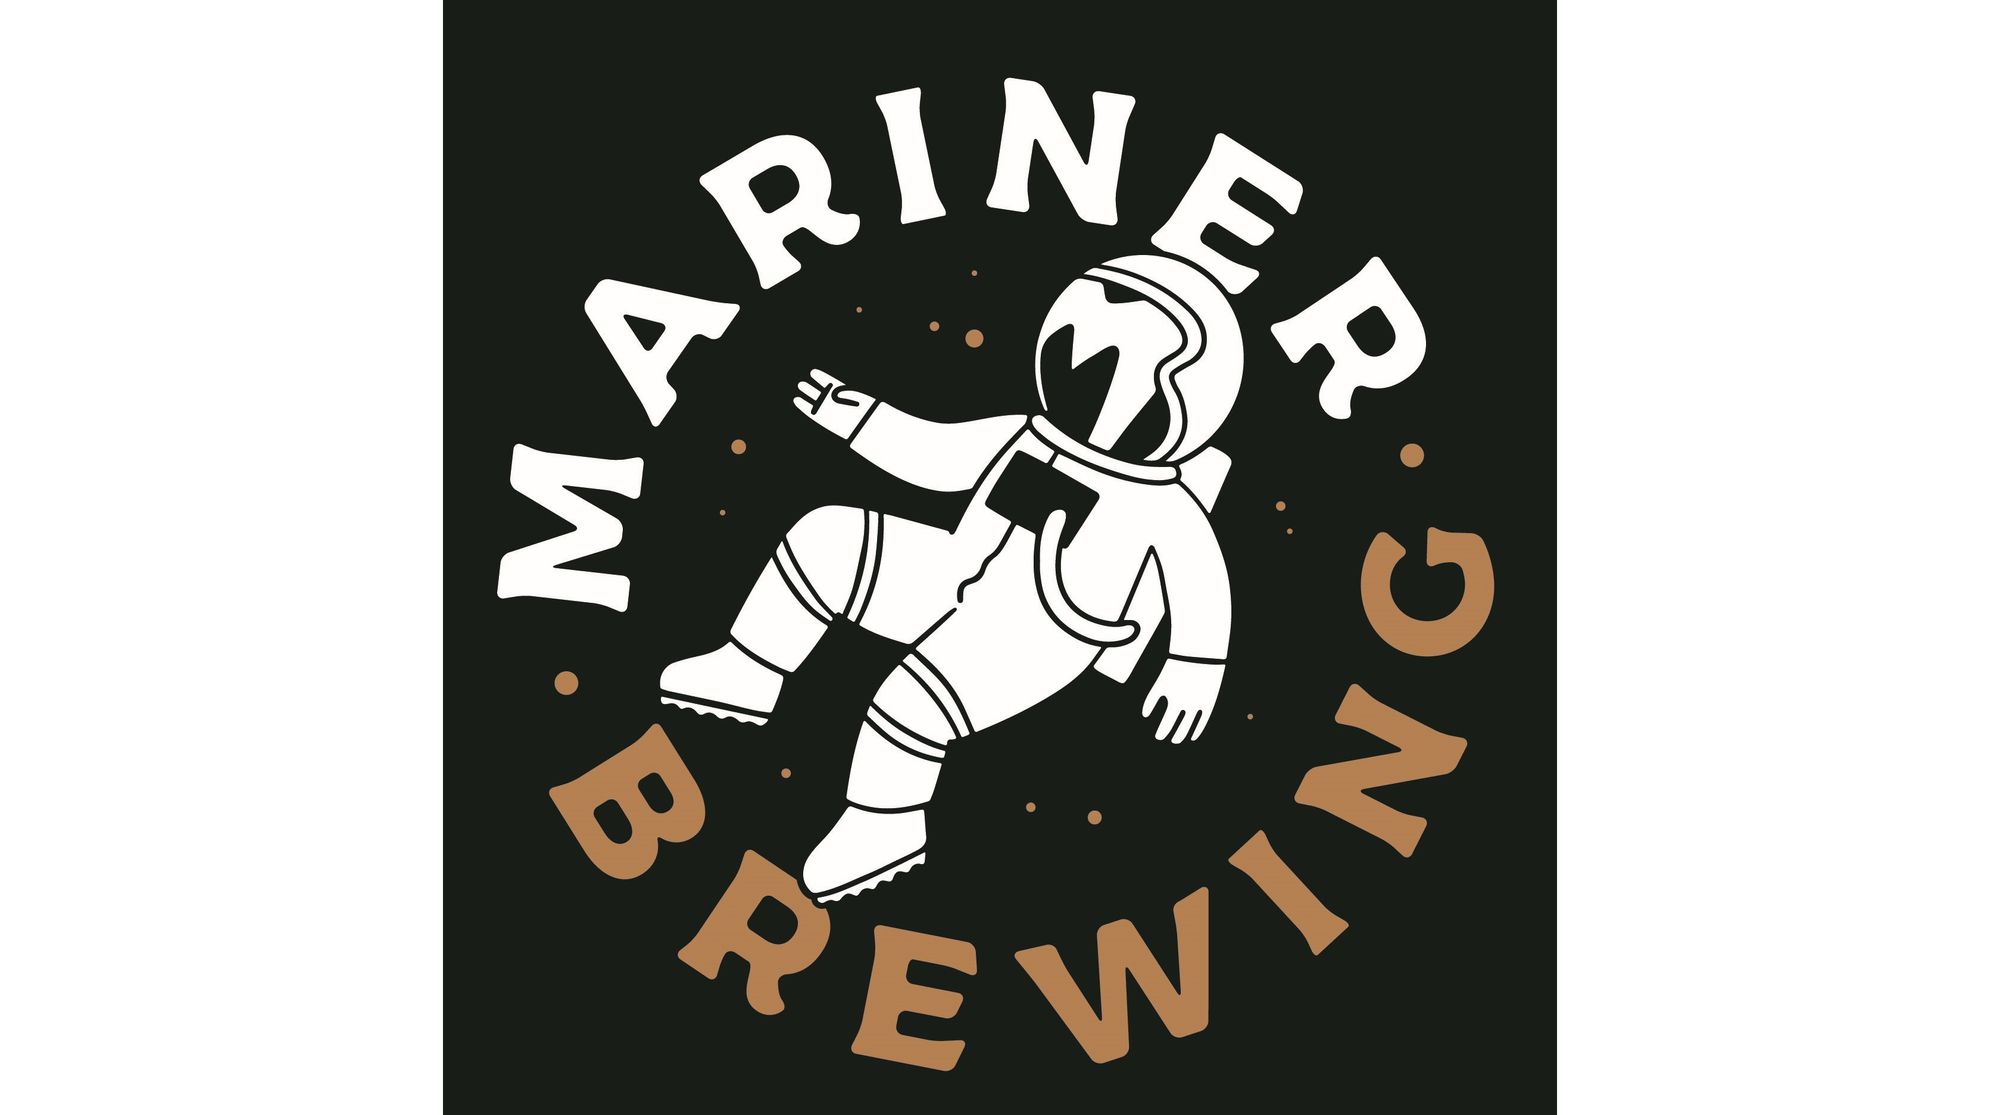 Explore Territory Unknown - Mariner Brewing